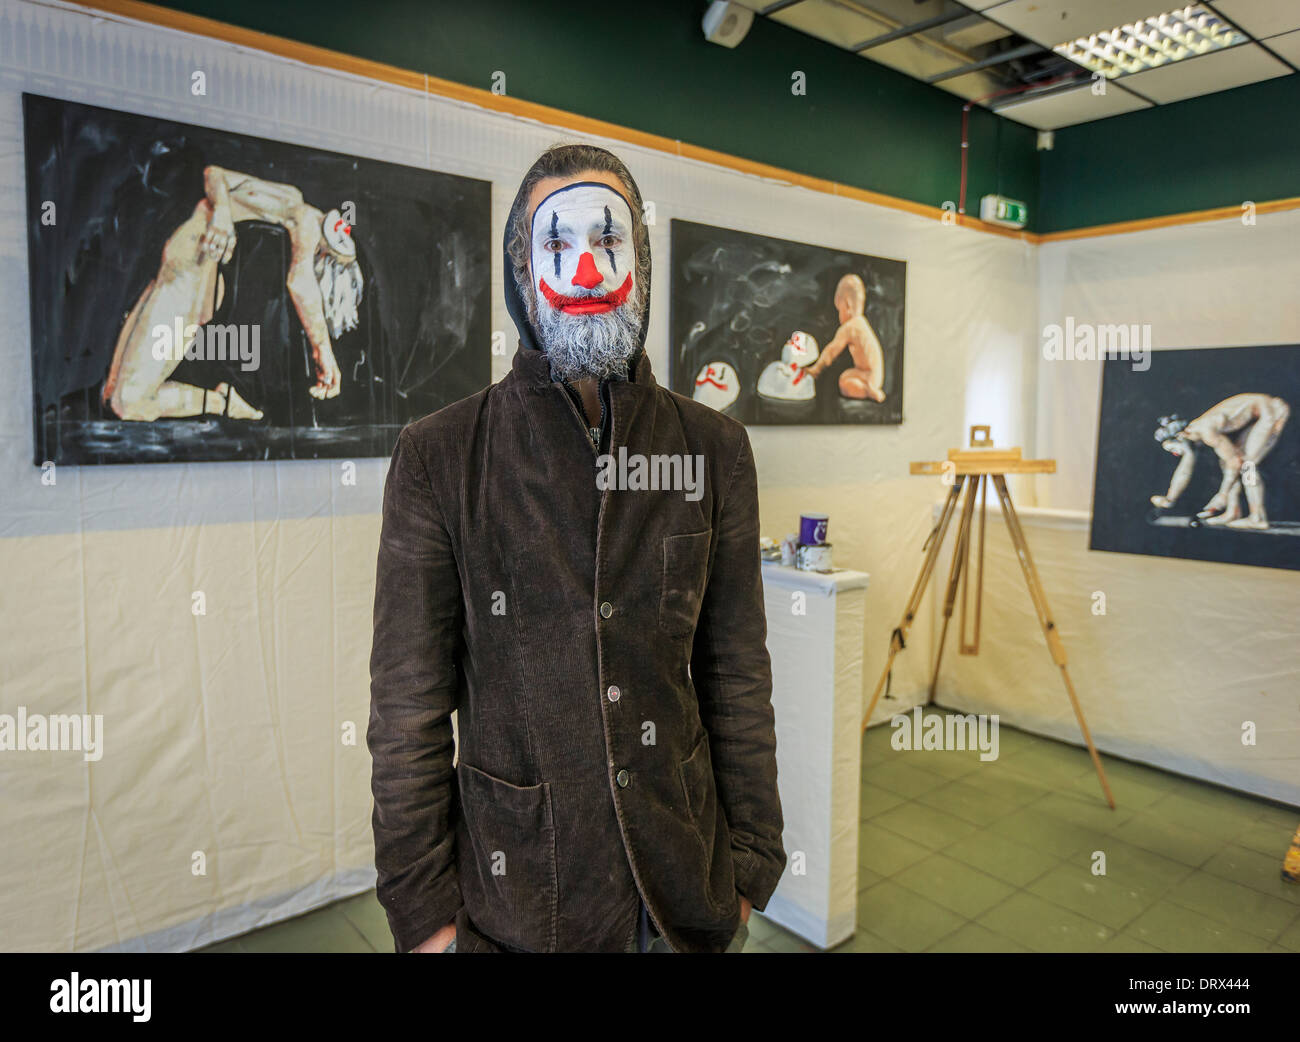 Portrait of an Artist with Clown Makeup, Iceland Stock Photo